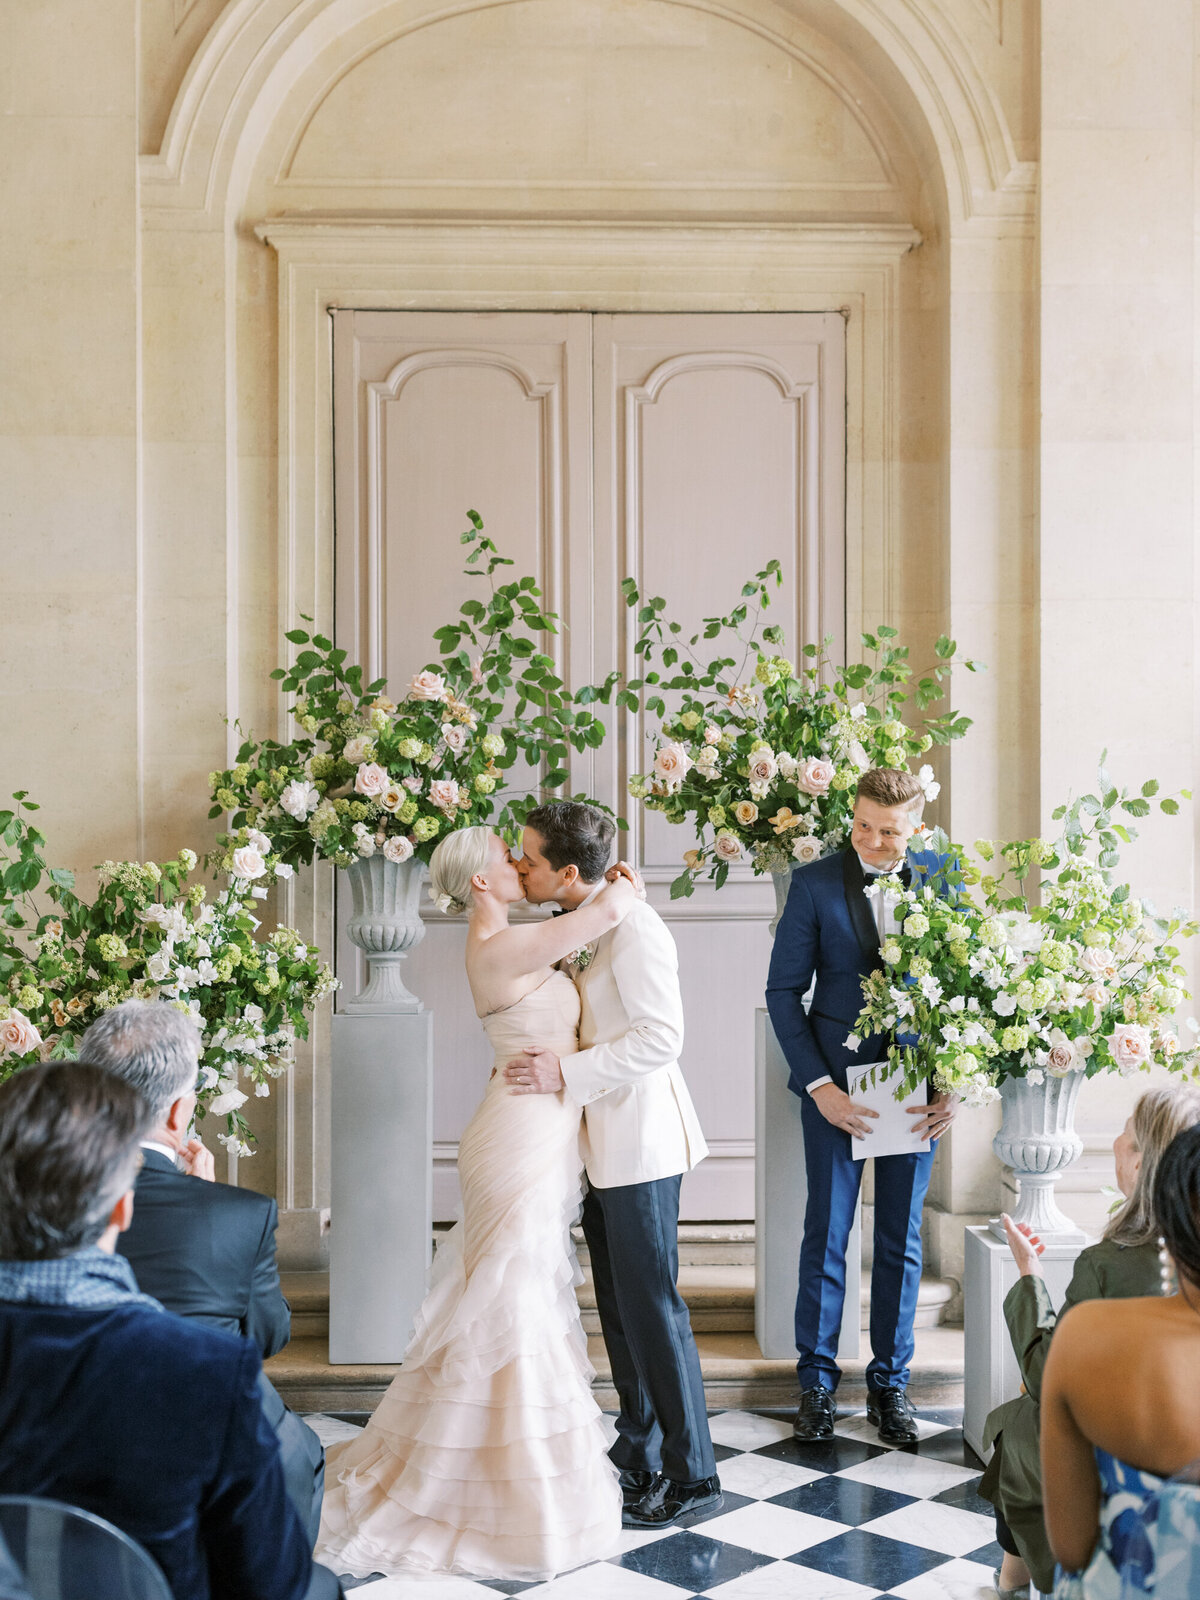 Jennifer Fox Weddings English speaking wedding planning & design agency in France crafting refined and bespoke weddings and celebrations Provence, Paris and destination Laurel-Chris-Chateau-de-Champlatreaux-Molly-Carr-Photography-68